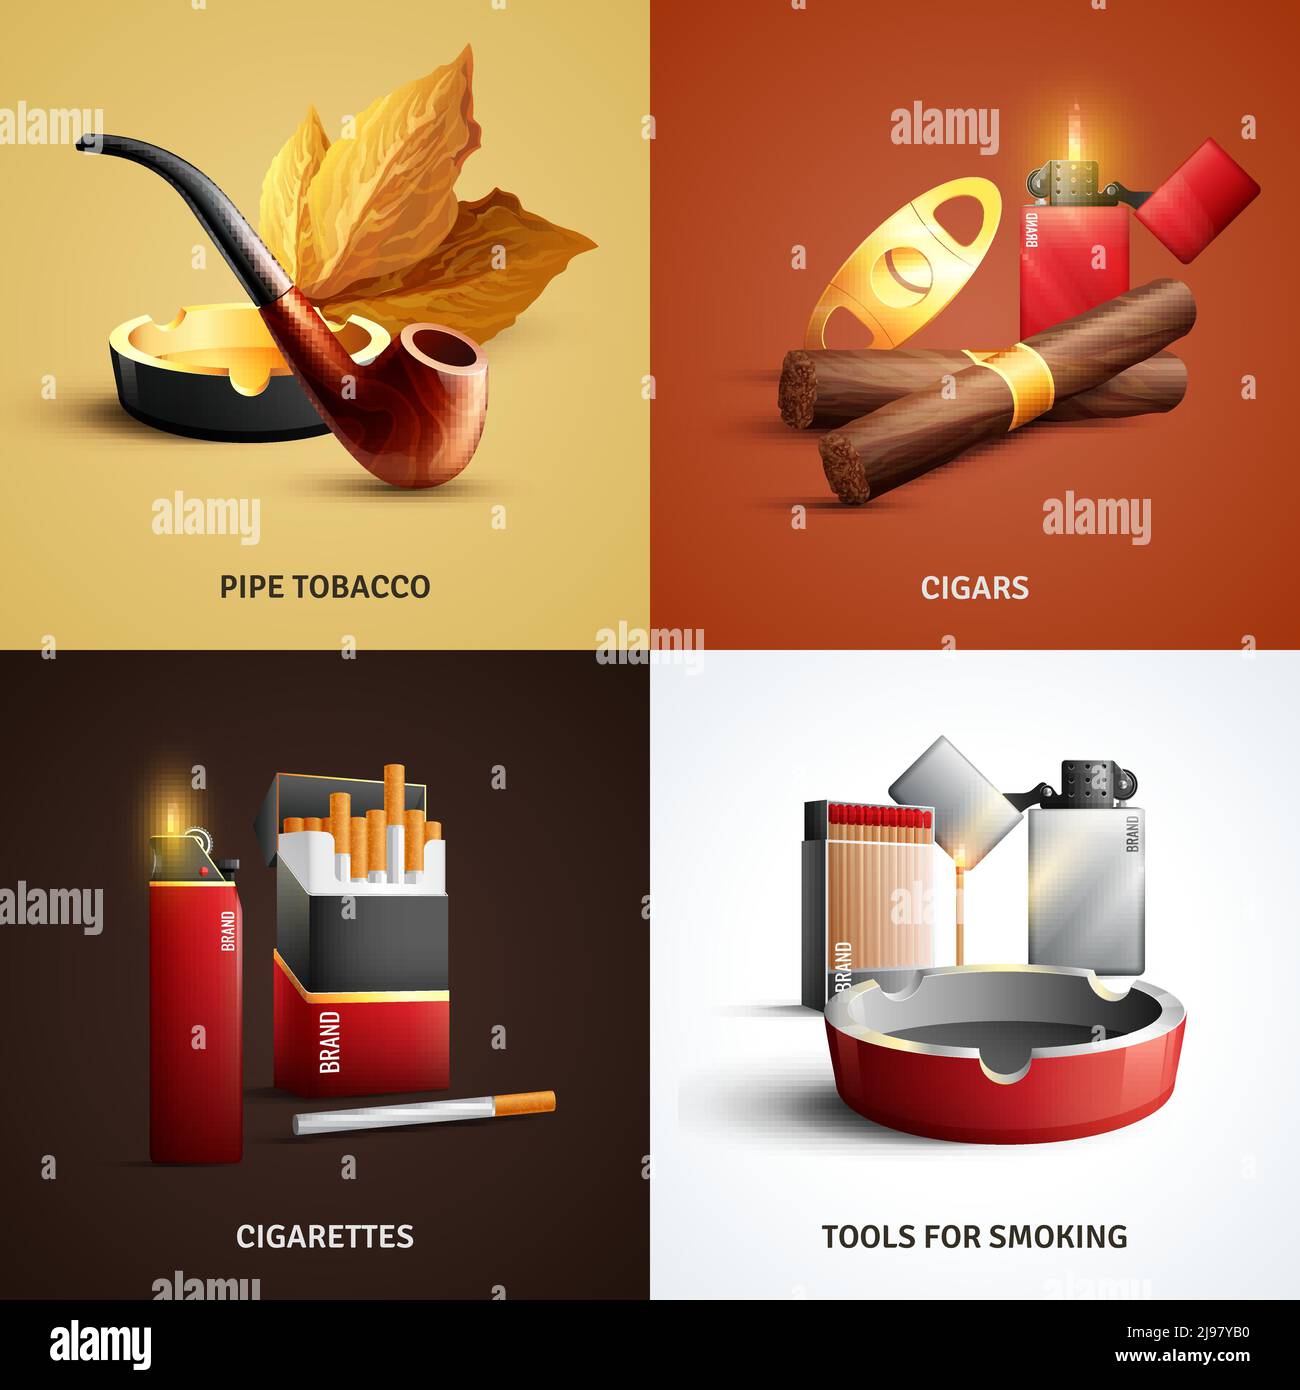 Tobacco products design concept with cigars, cigarettes, wood pipe and ashtray, tools for smoking isolated vector illustration Stock Vector